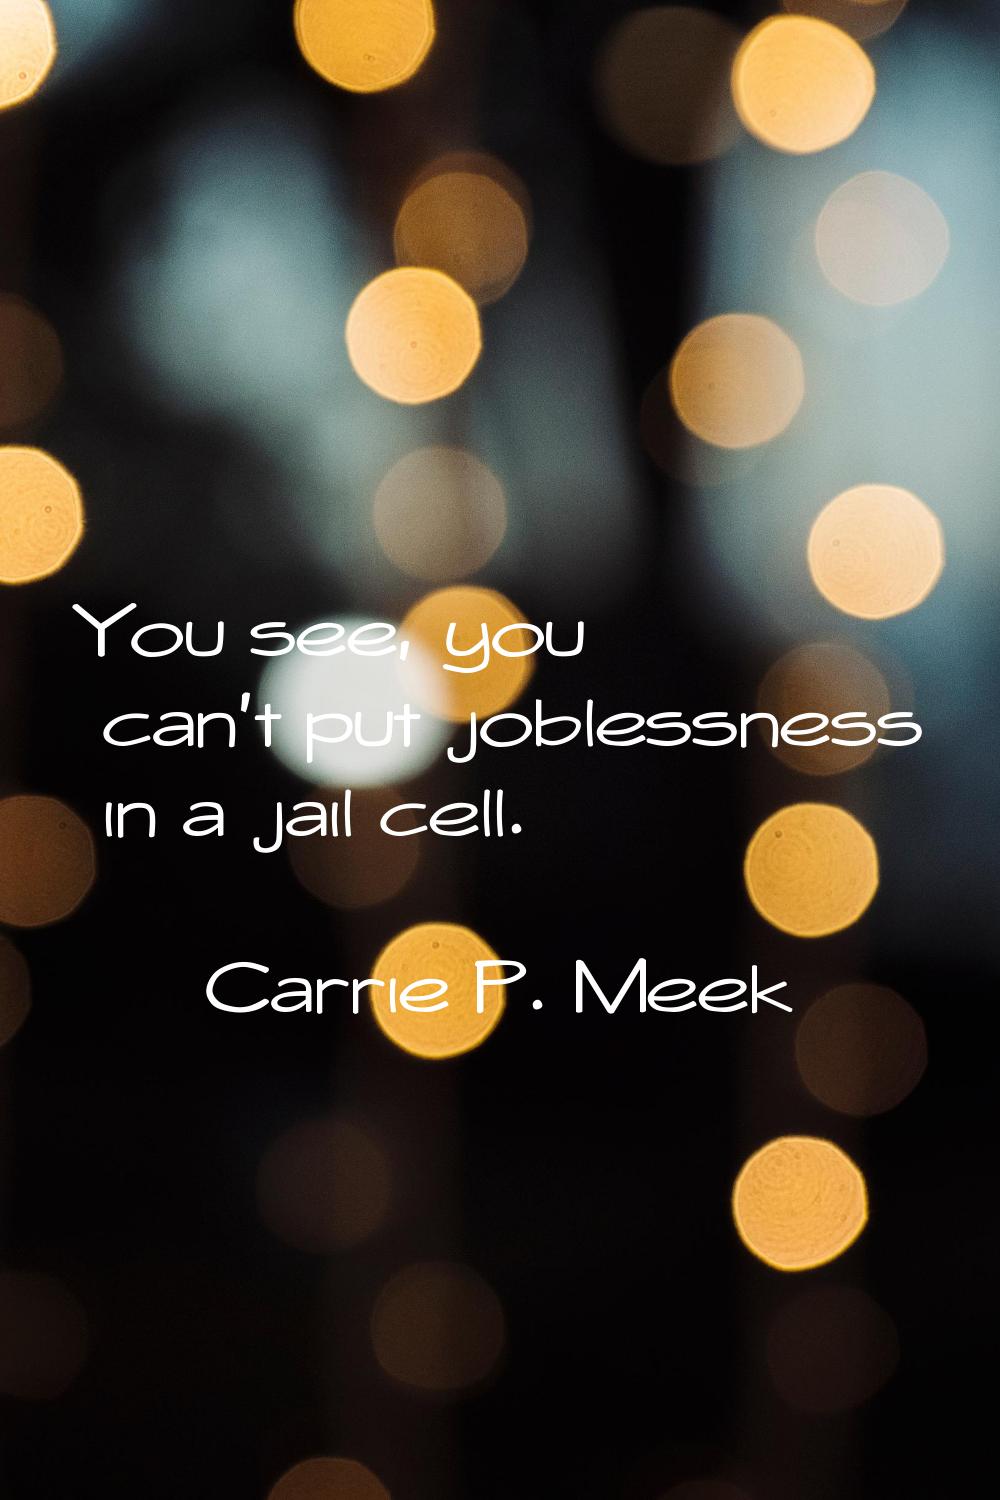 You see, you can't put joblessness in a jail cell.